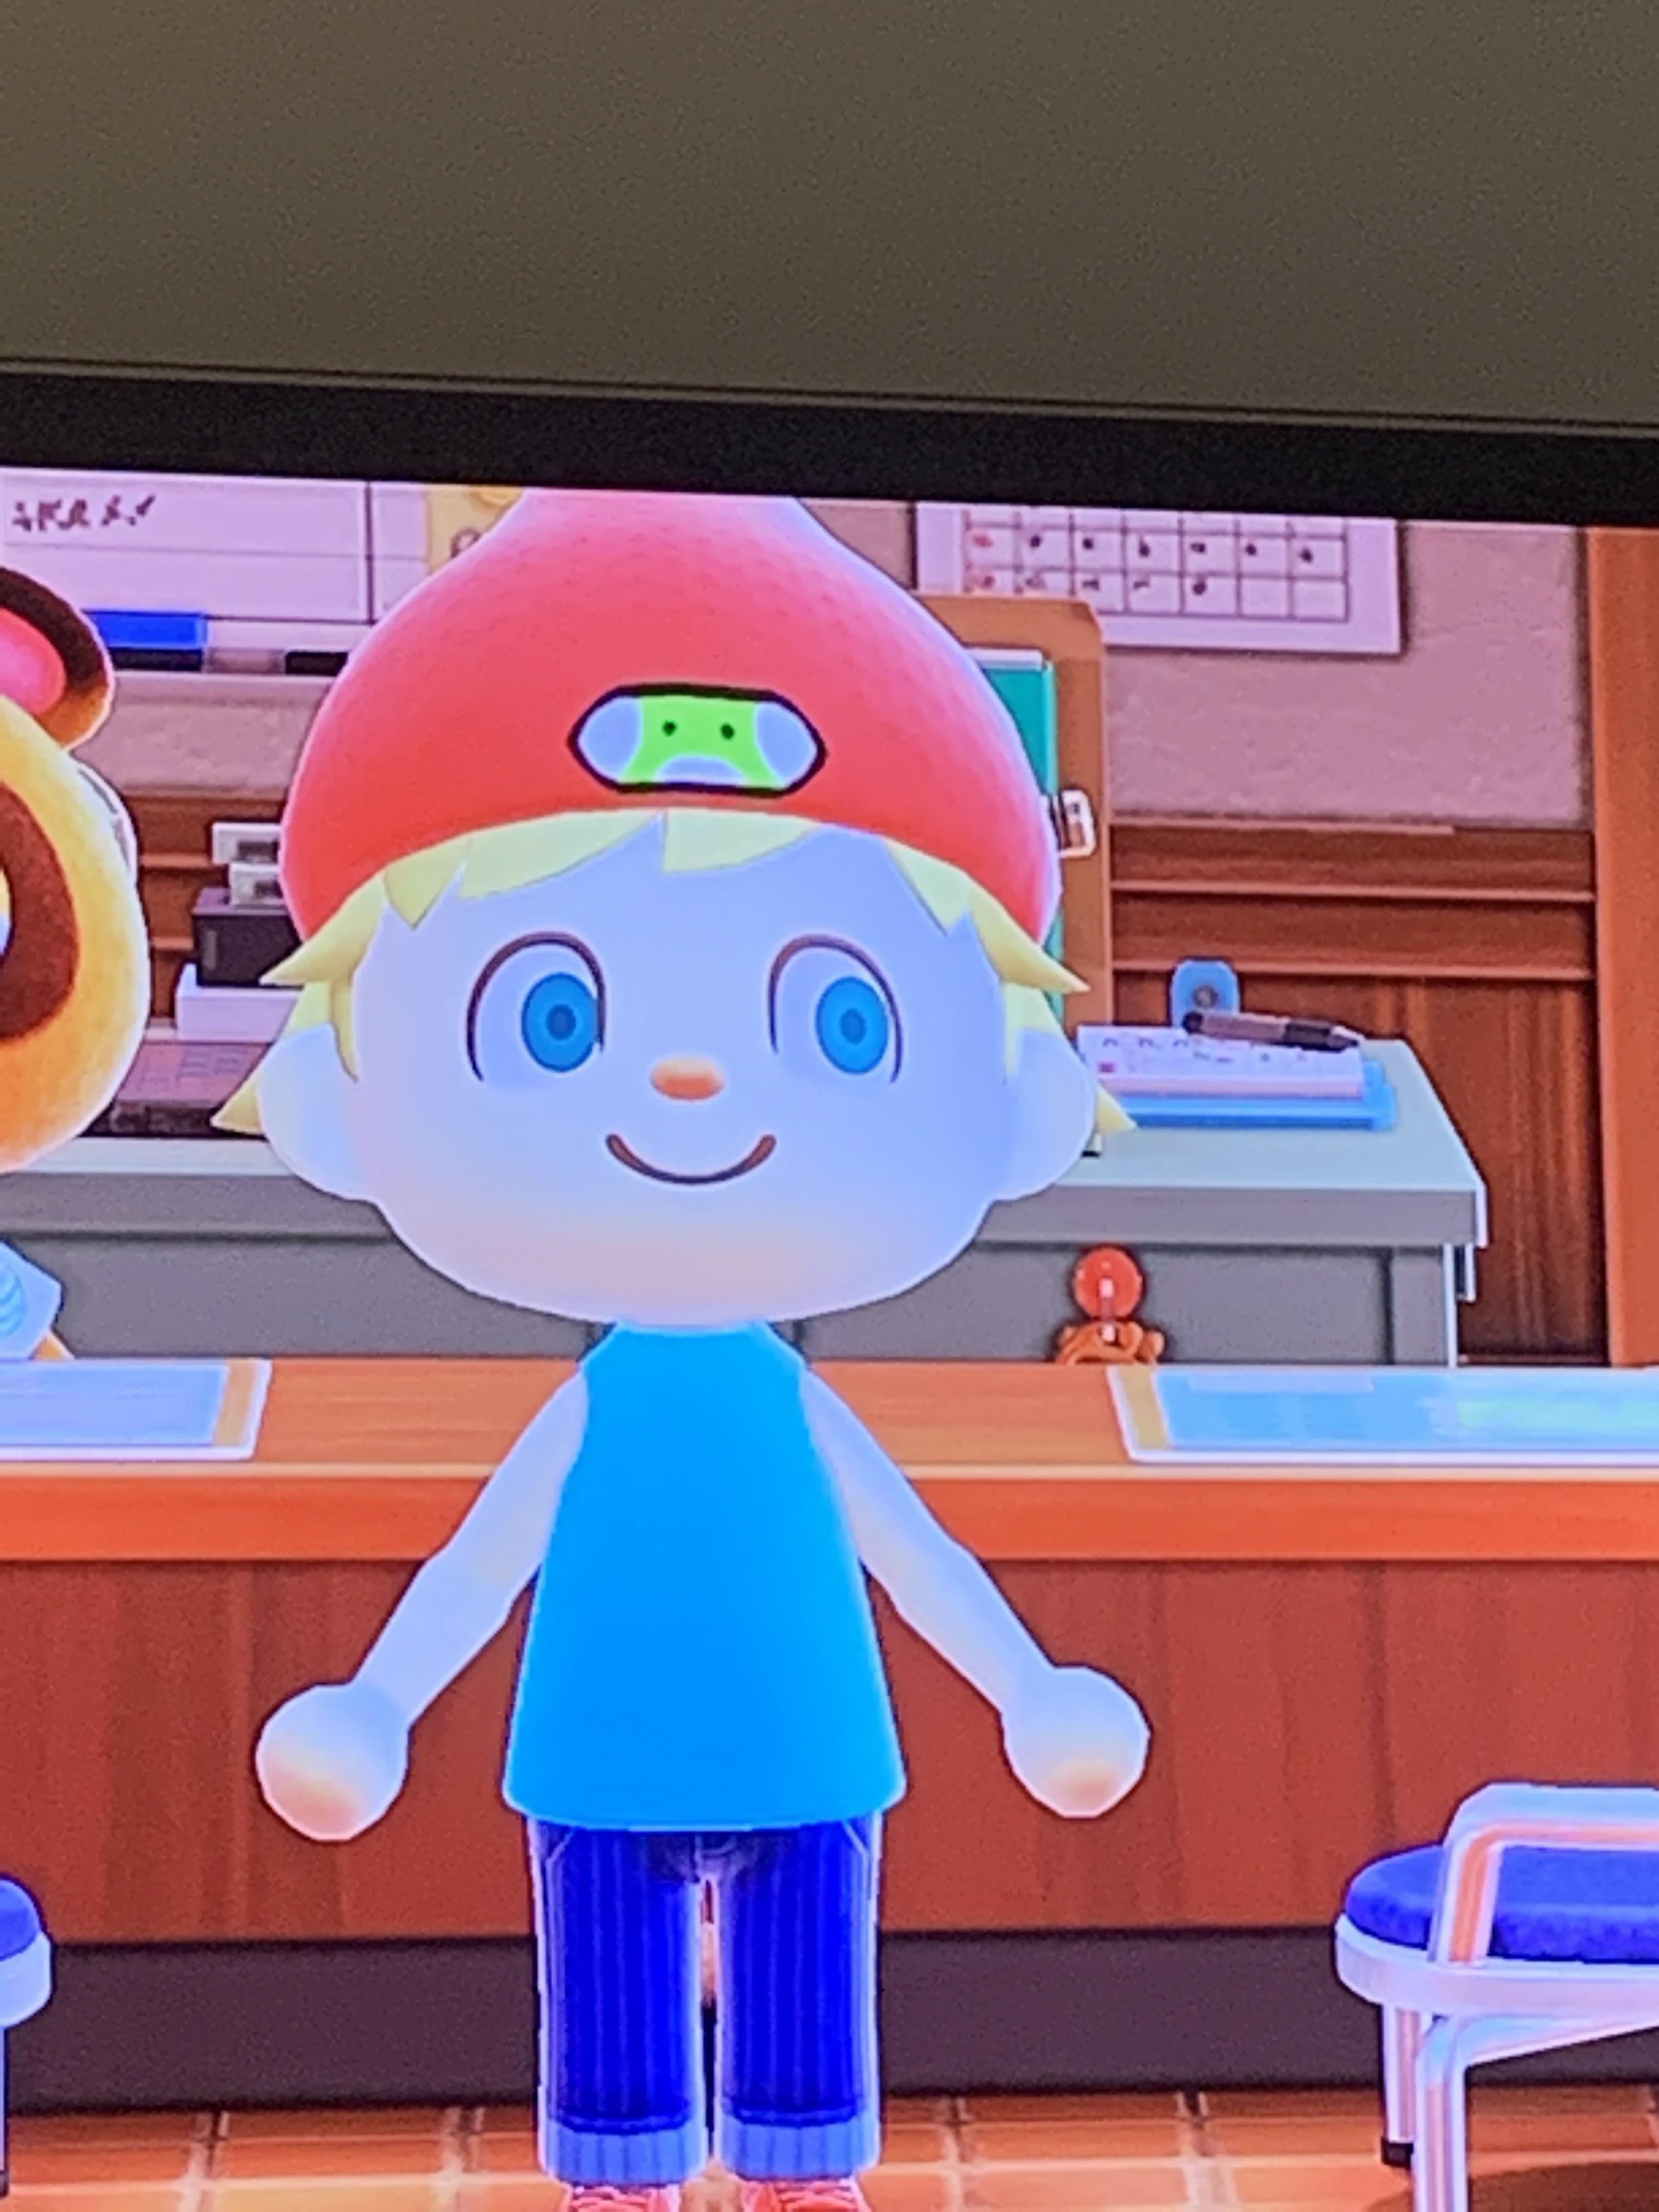 Parappa’s full outfit in New Horizons | Scrolller